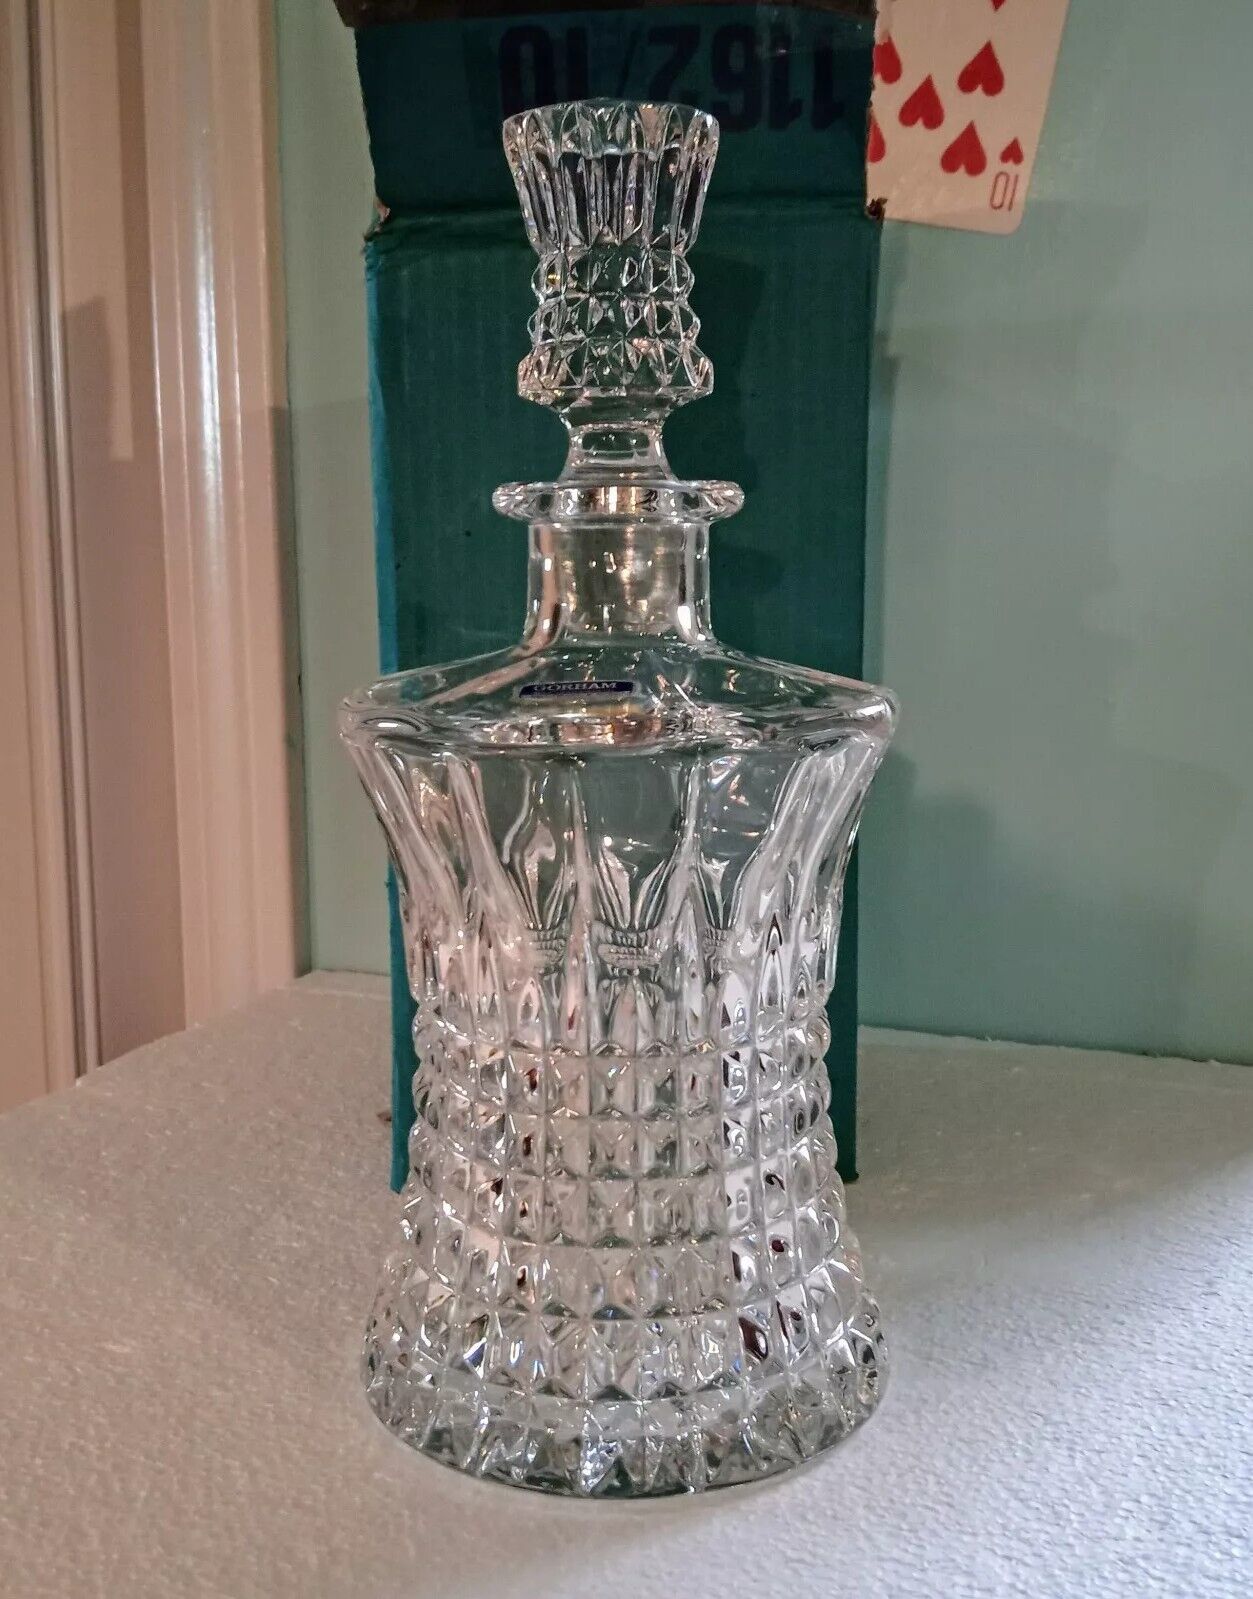 VTG GORHAM FULL LEAD CRYSTAL DECANTER w/Stopper By Nochtmann Of W Germany Boxed